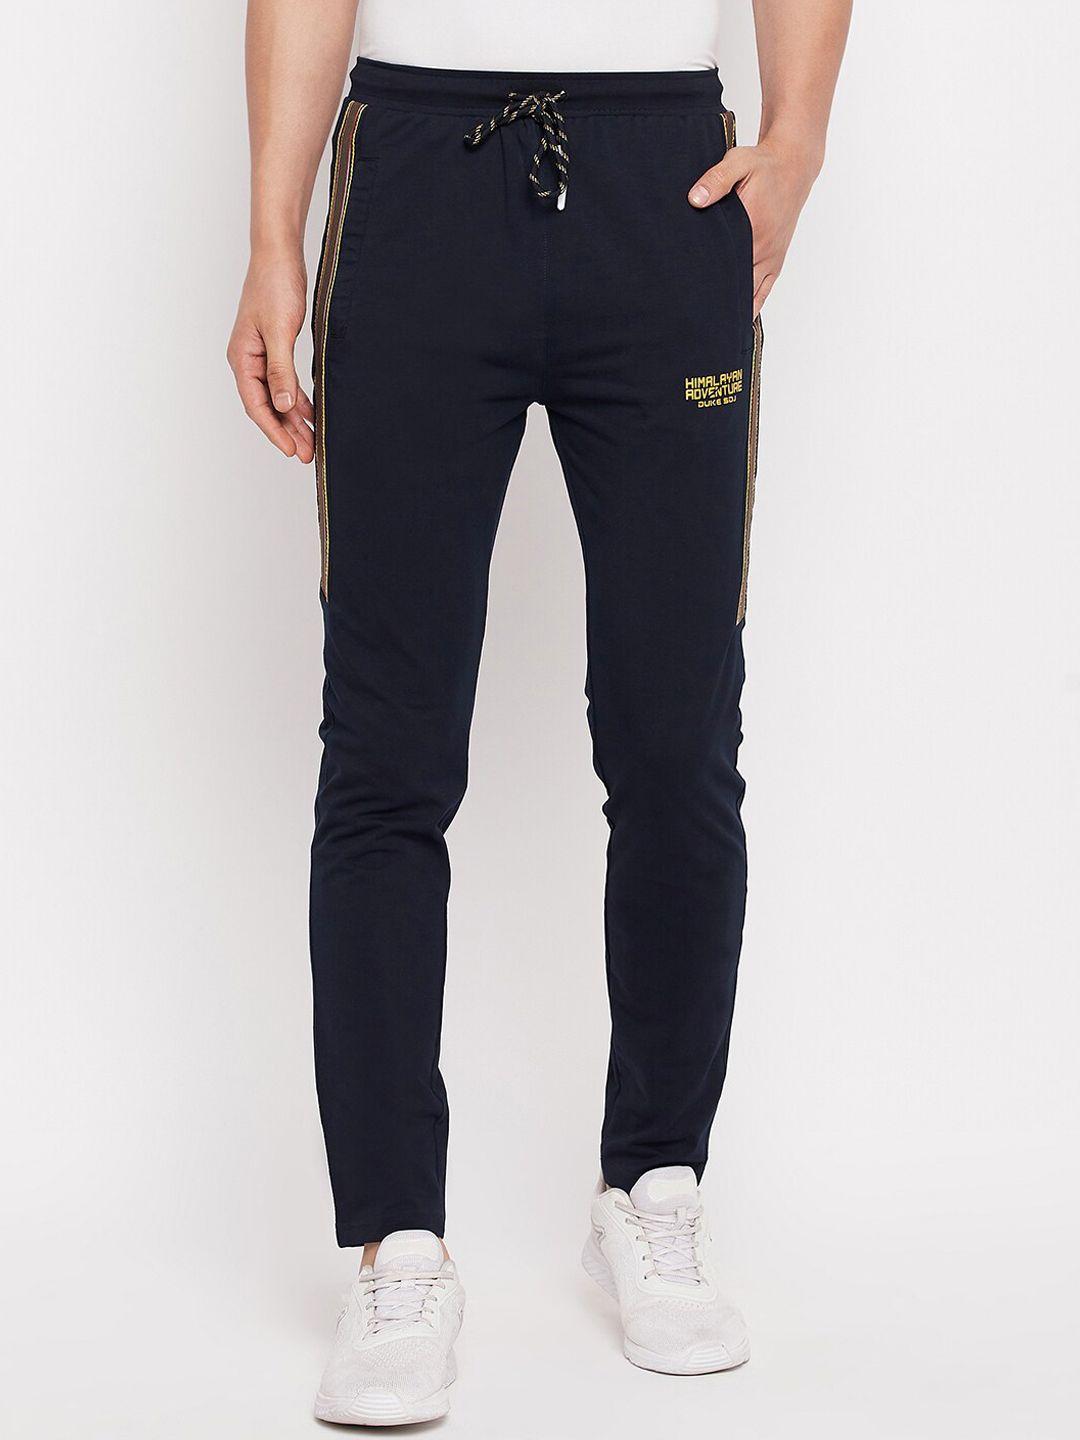 duke-stardust-men-cotton-relaxed-fit-mid-rise-sports-track-pant